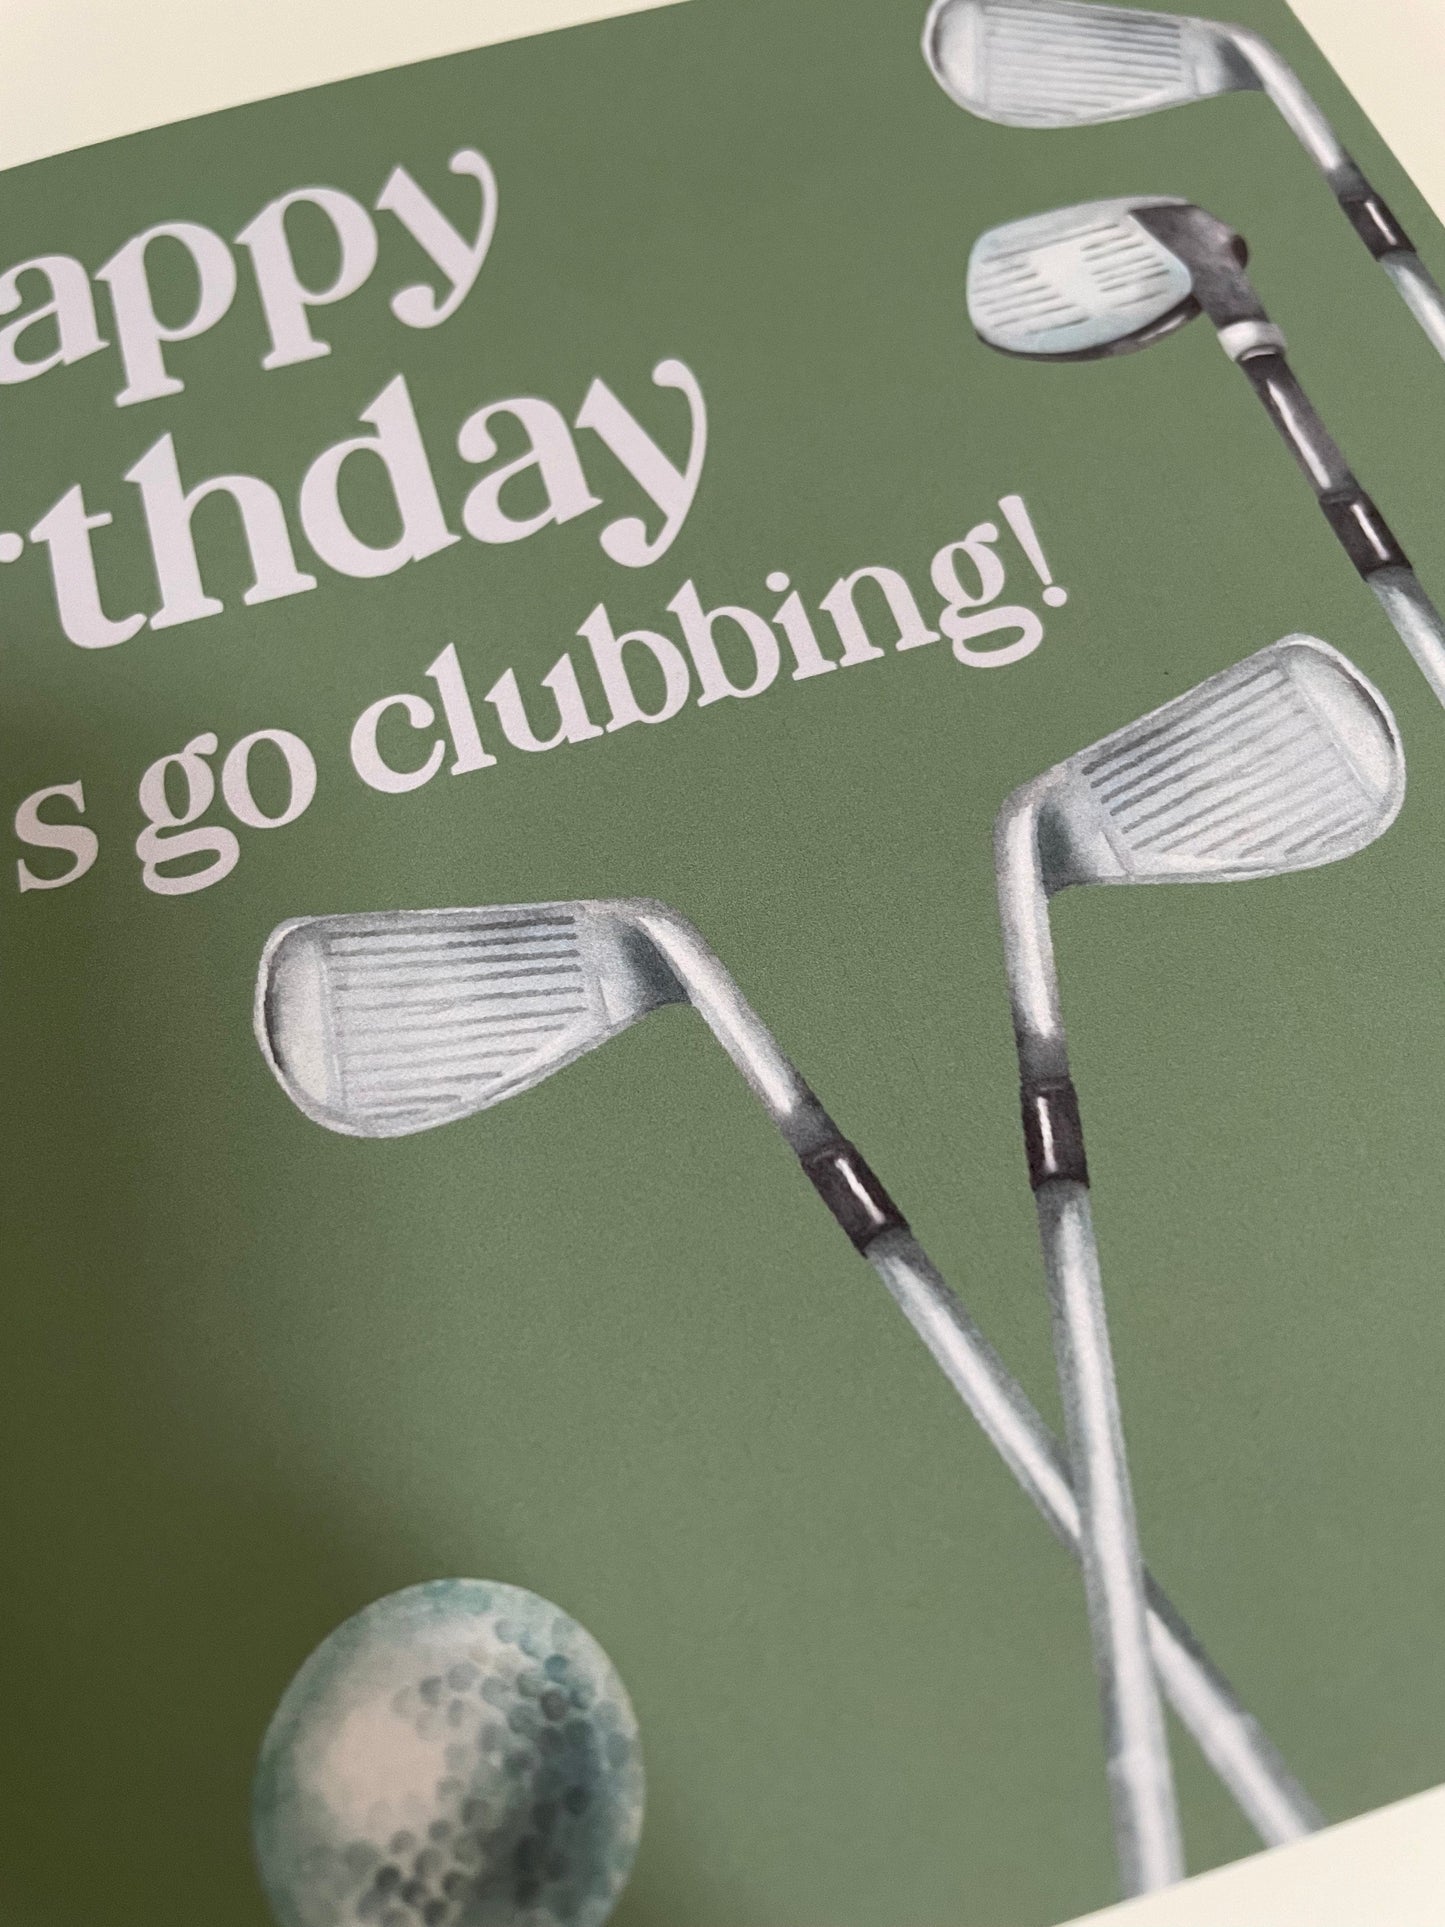 Golf “let’s go clubbing” birthday card And Hope Designs Cards